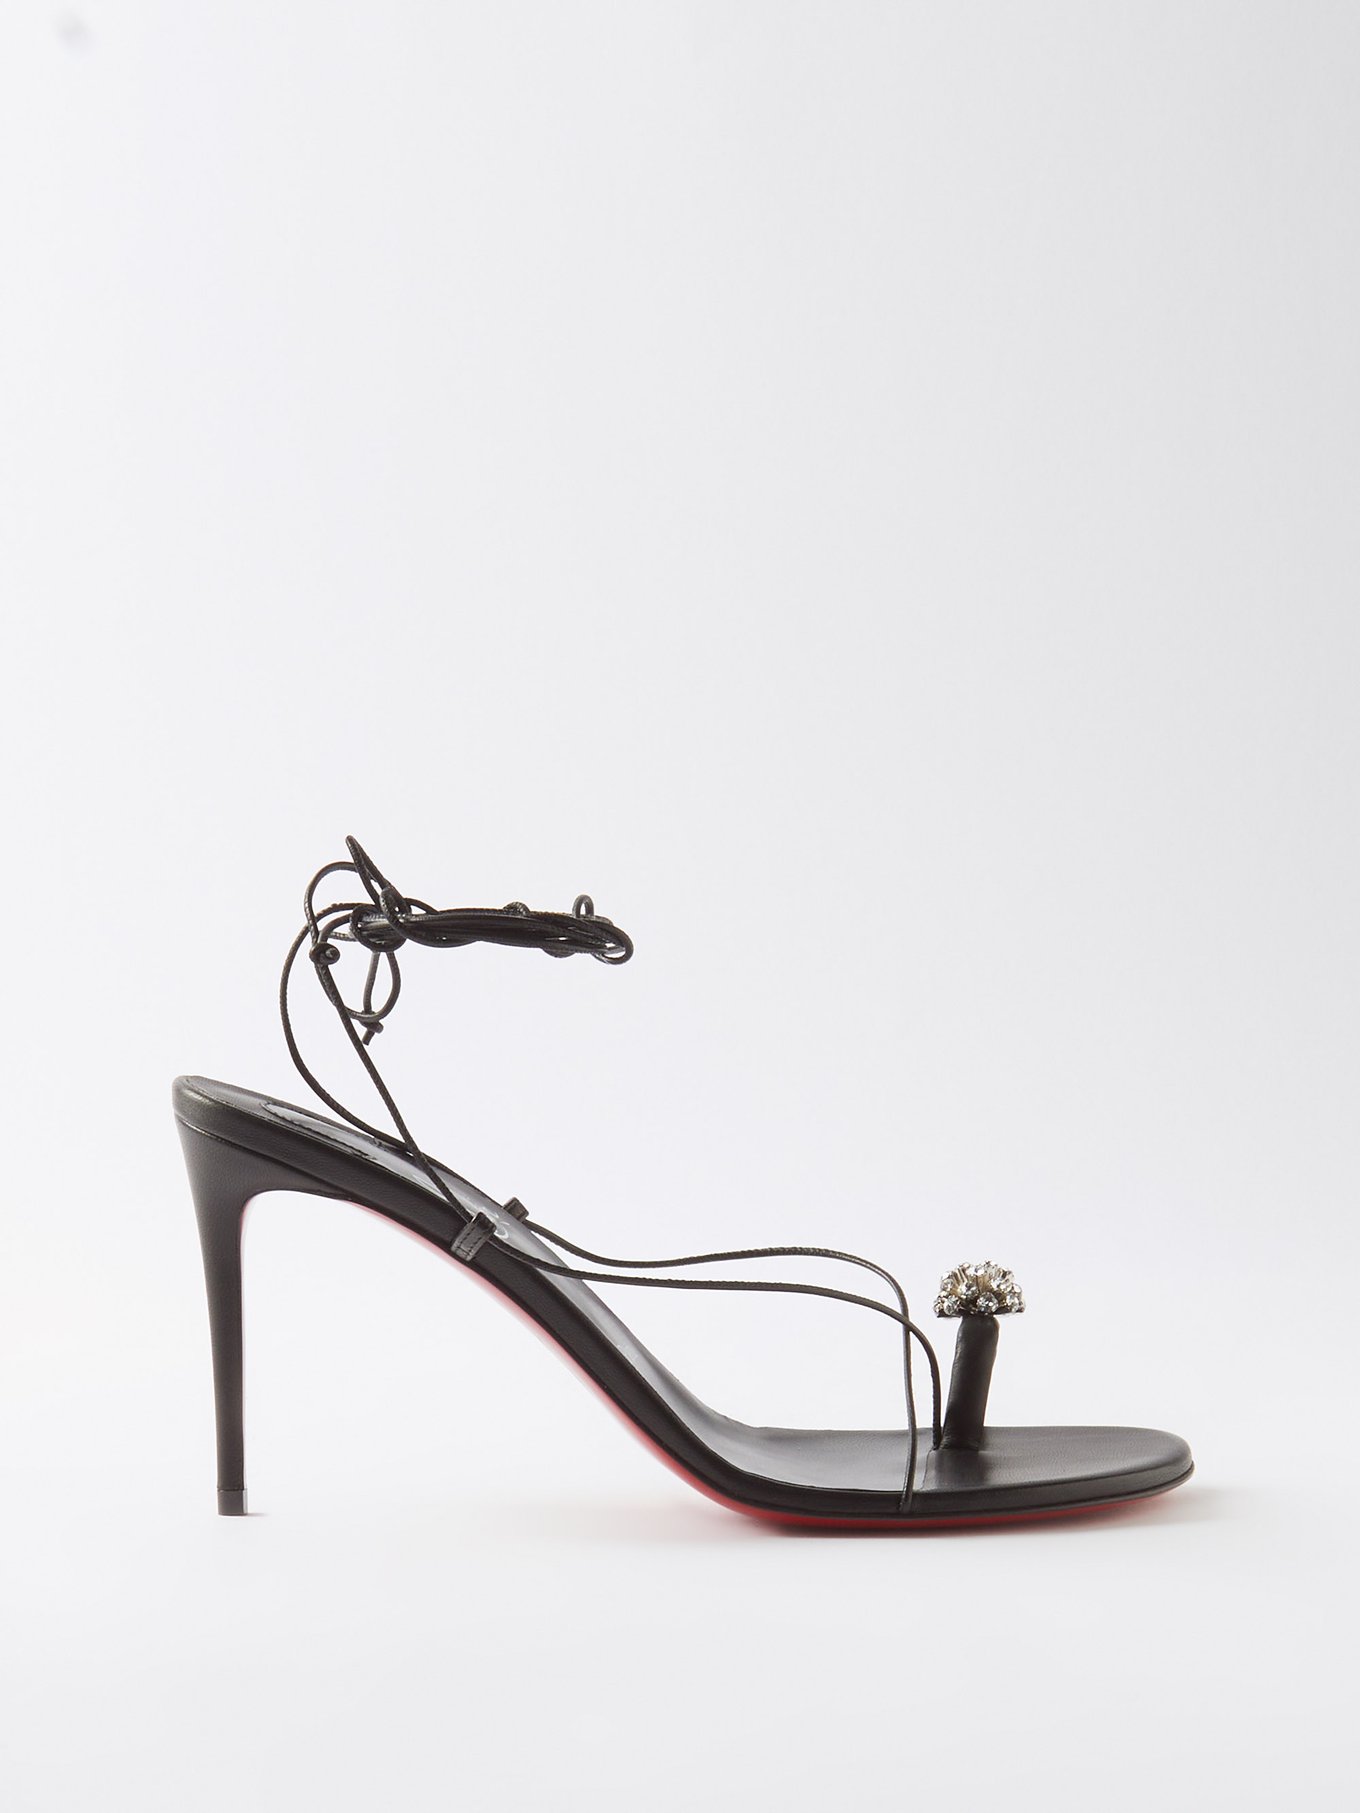 Leather sandals Christian Louboutin Black size 42 EU in Leather